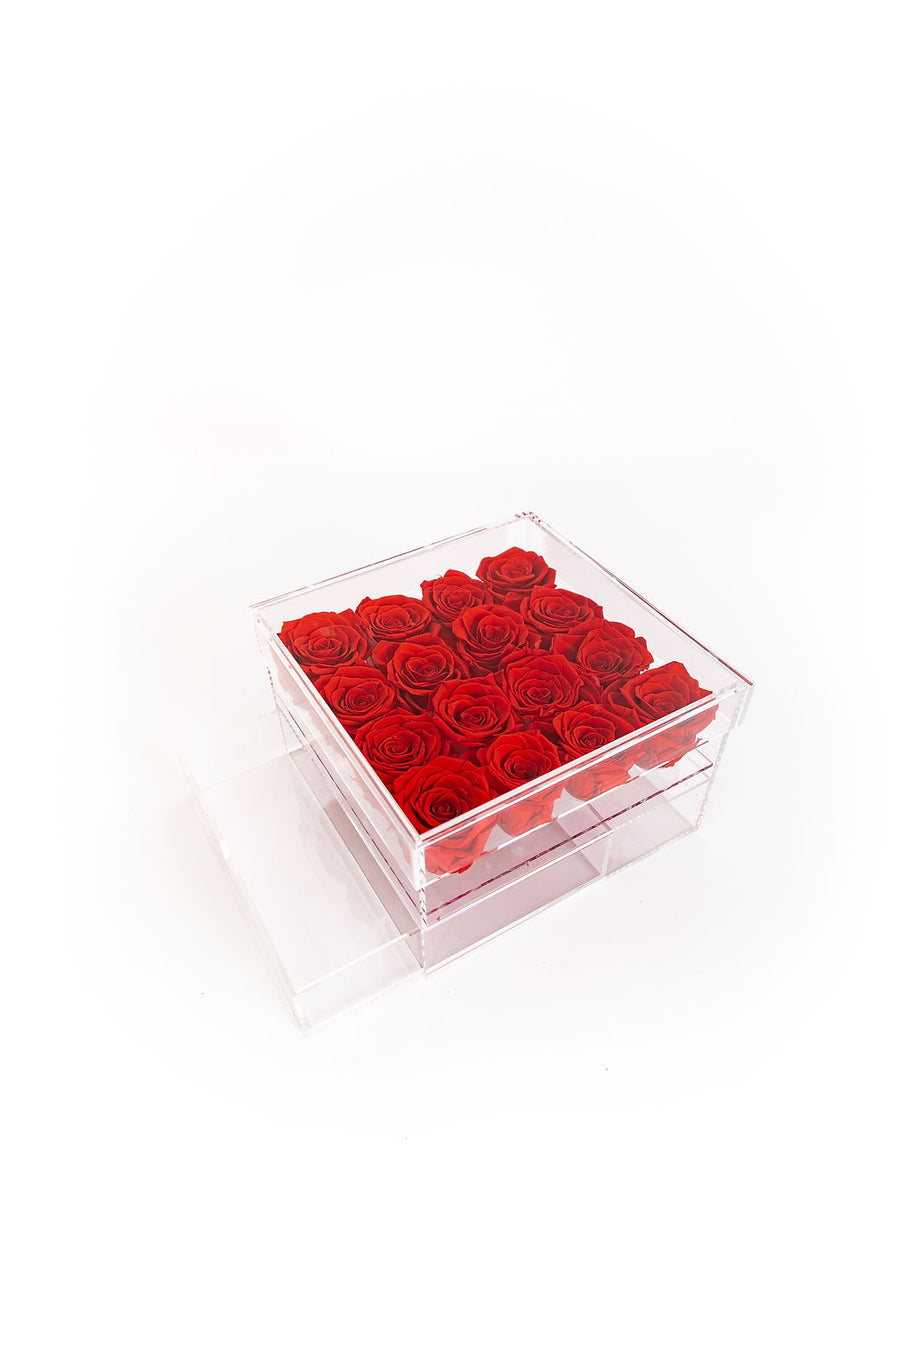 RED 16 PRESERVED ROSES